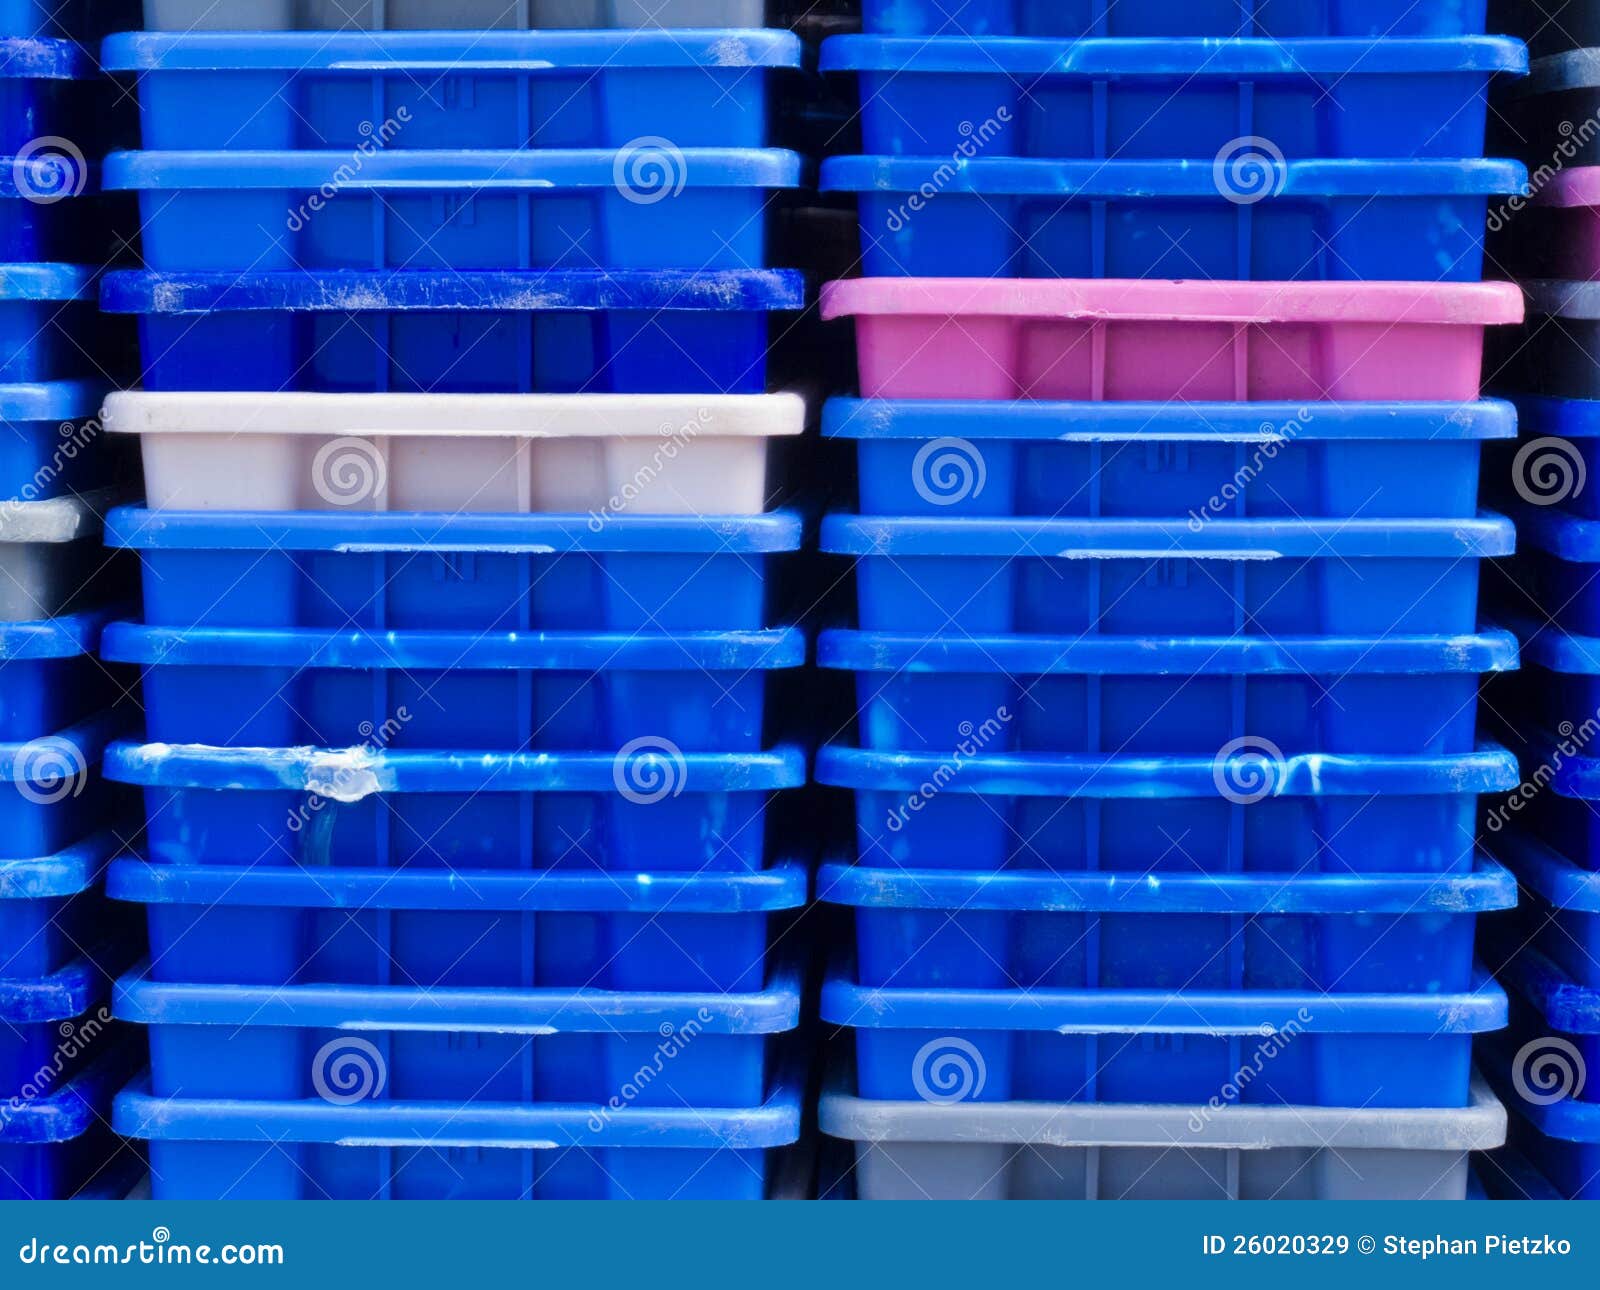 stack of empty colorful plastic fishery containers